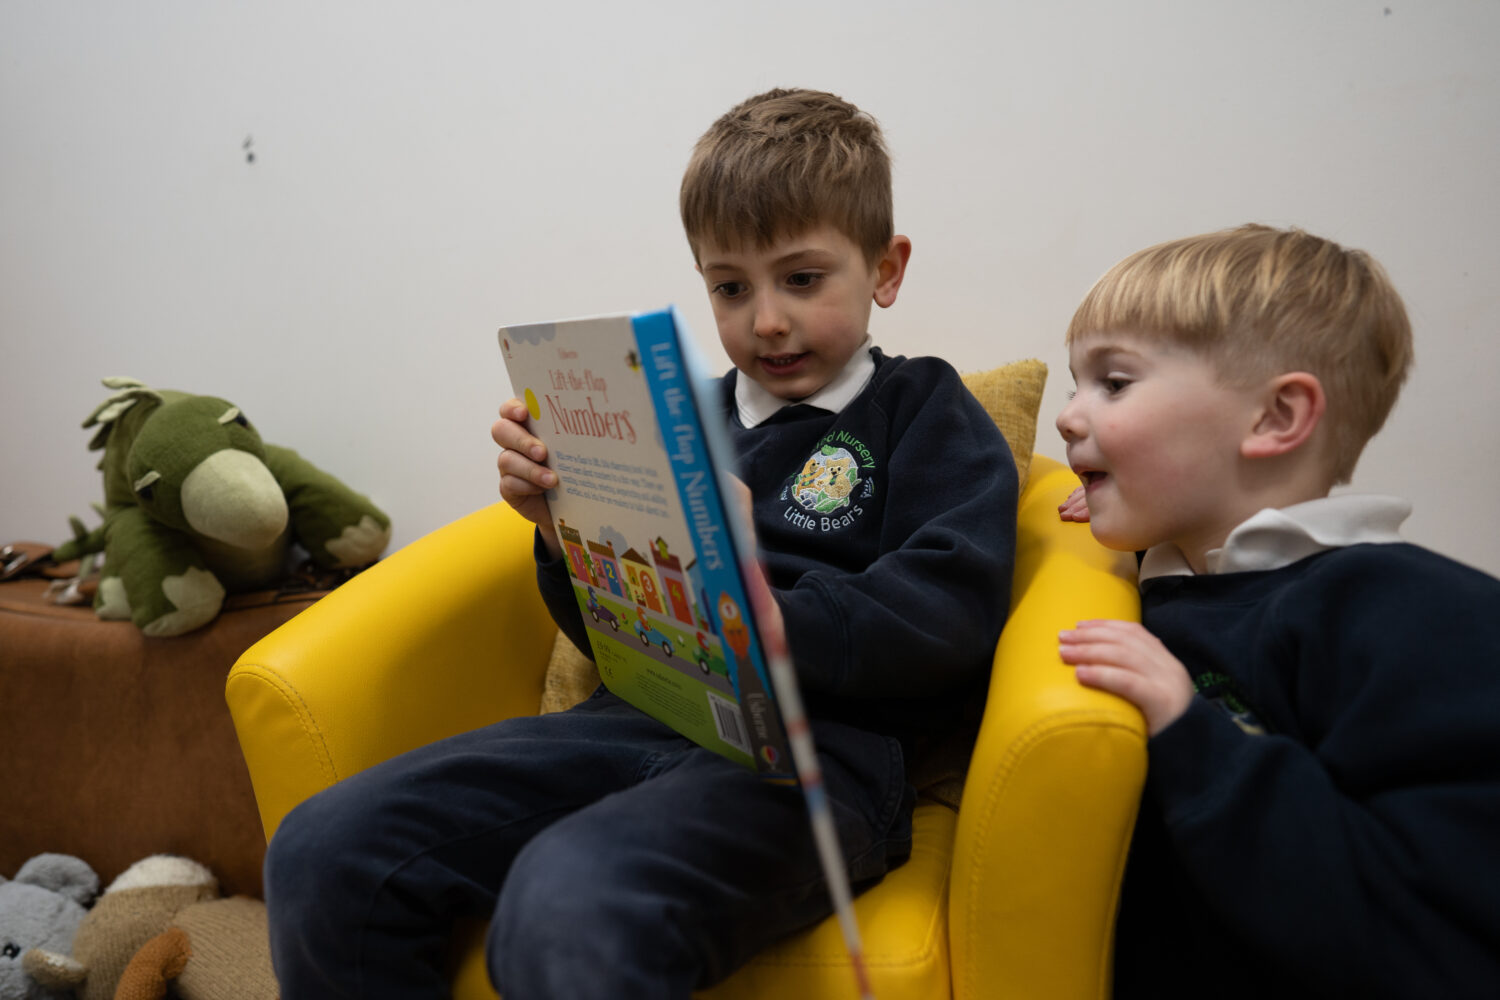 Two young boys from Little Bears Nursery are pictured sat down about to read a storybook together.